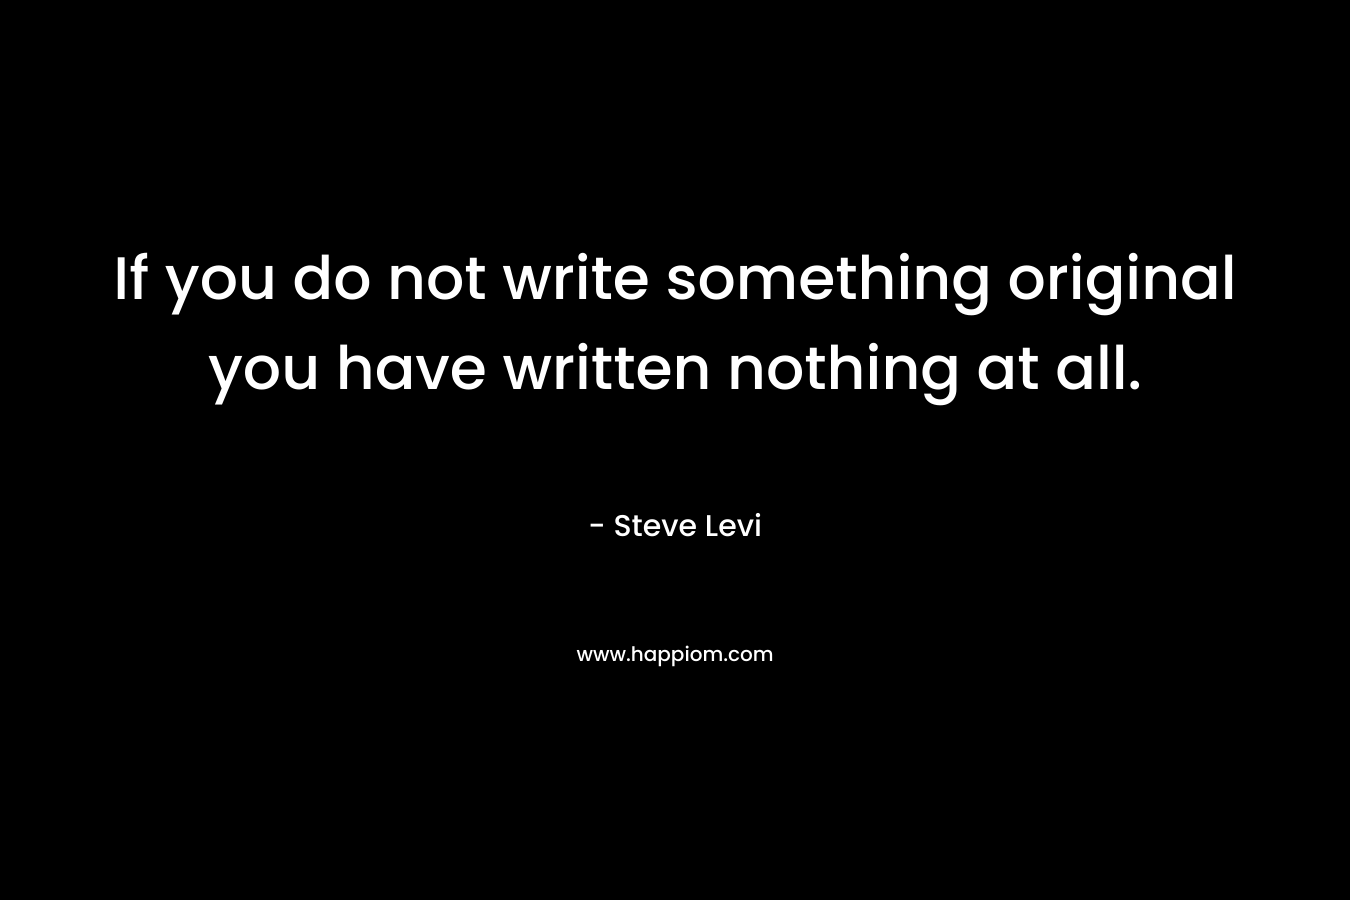 If you do not write something original you have written nothing at all.